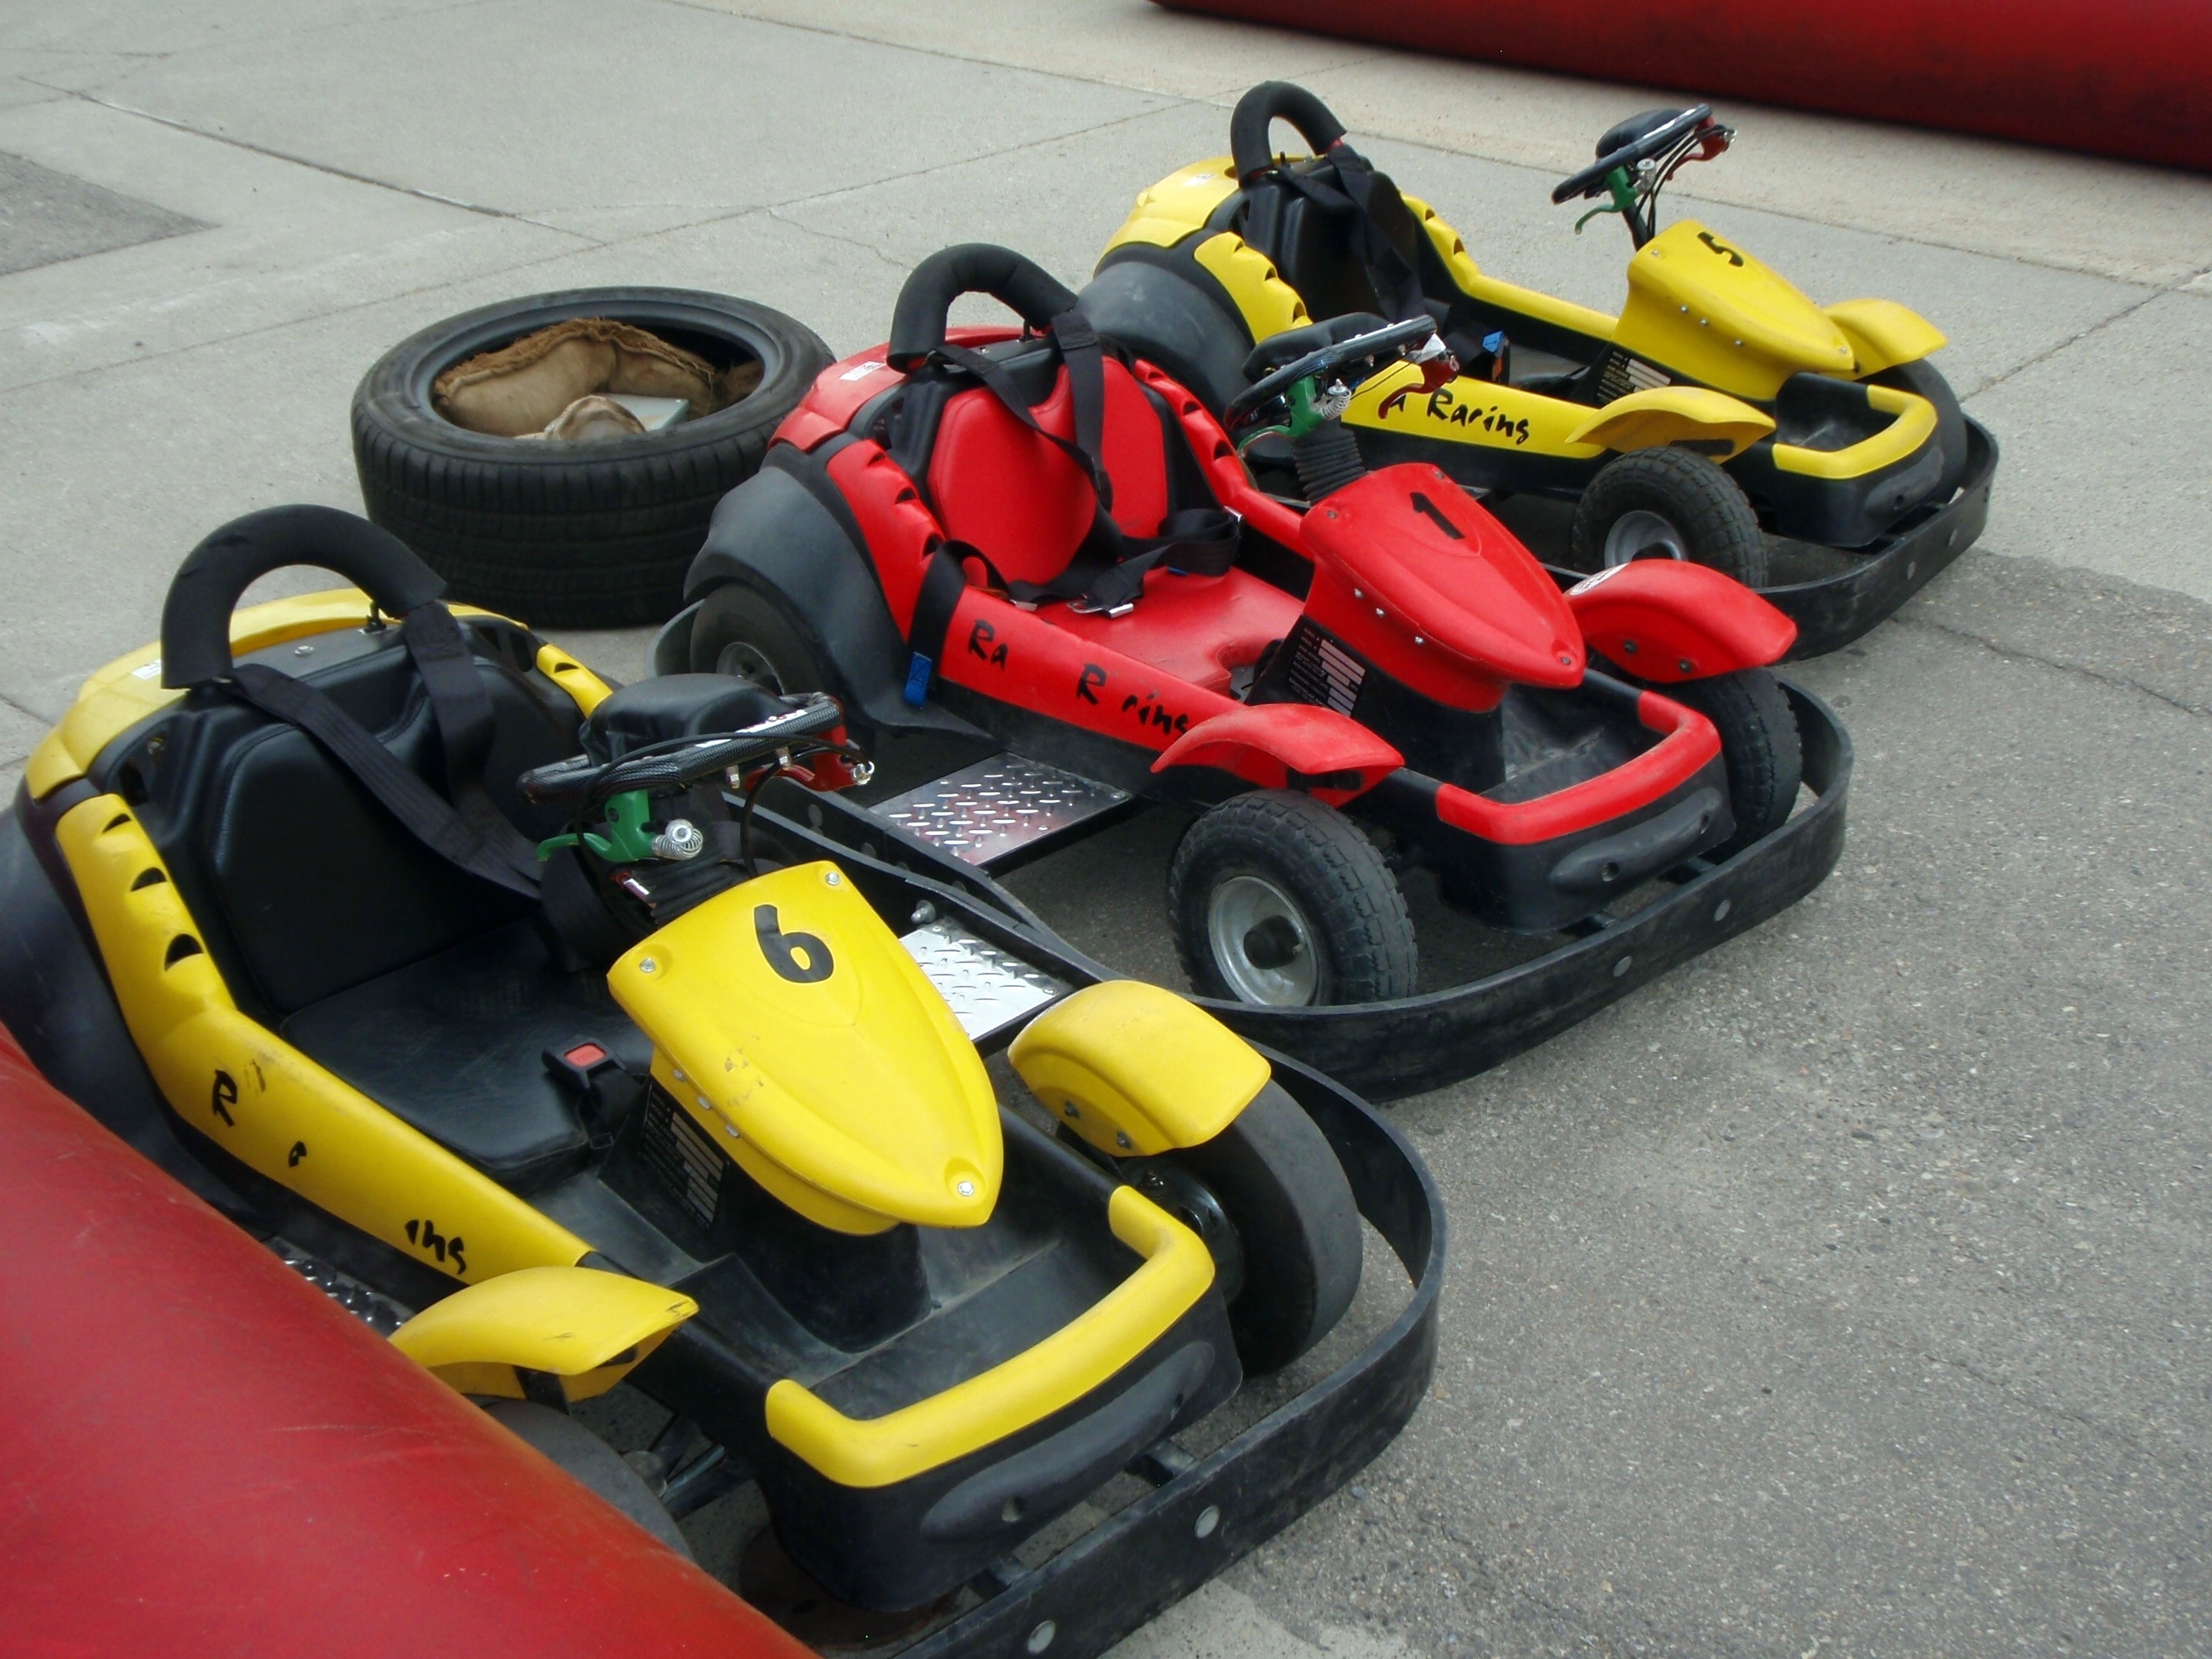 "The Day I First Rode a Go-Kart" - A past experience that has had an impact on your life ...